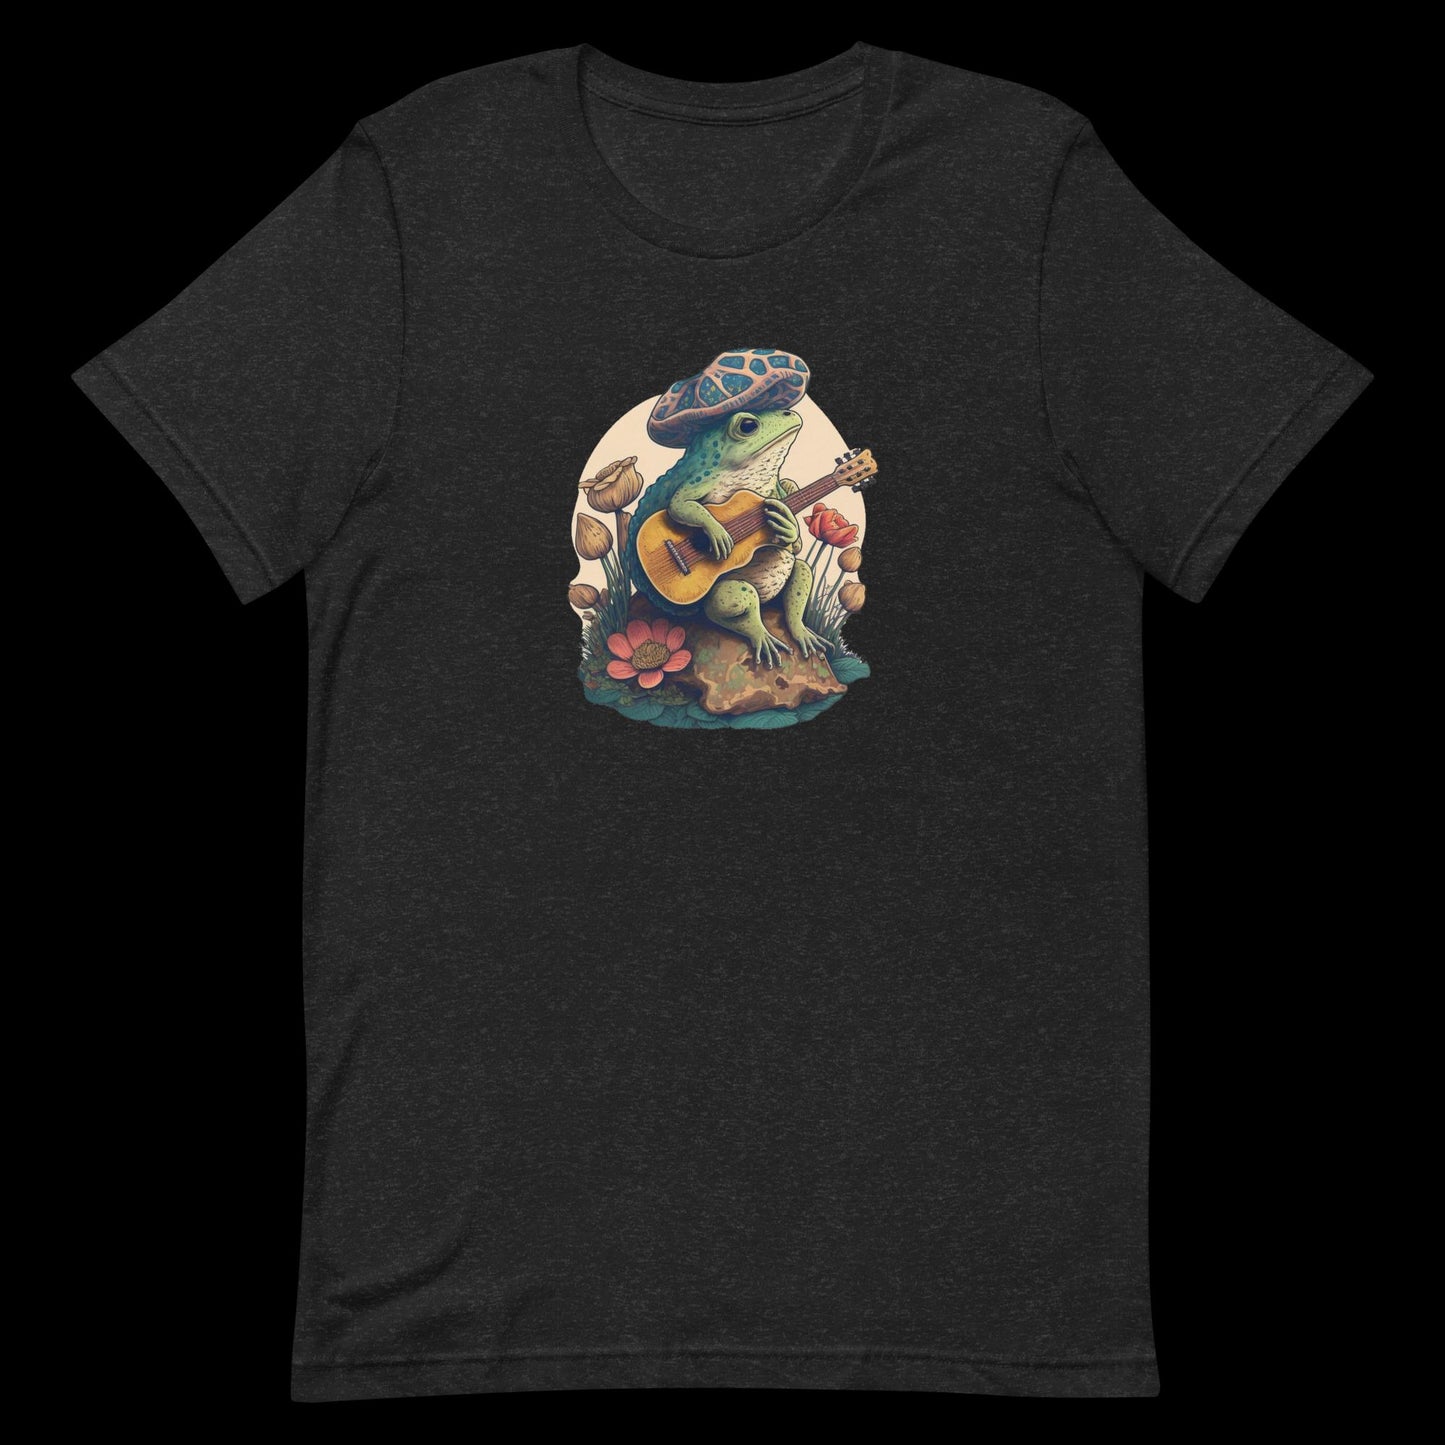 Frog On A Rock With A Guitar - Unisex T-Shirt